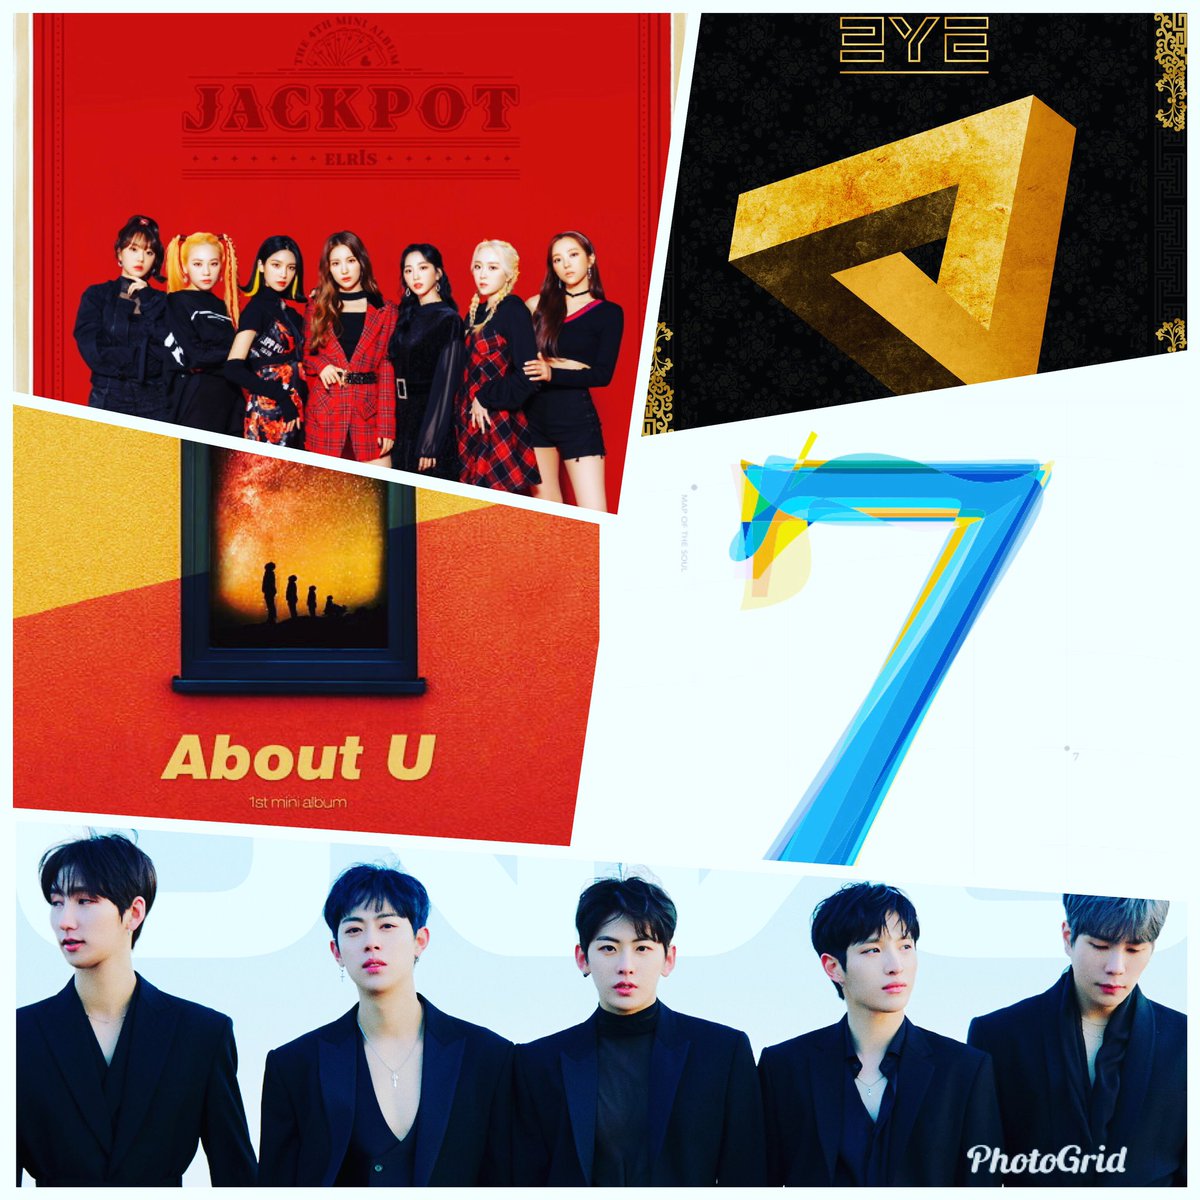 Bringing back the FRIDAY  #miniplaylist after some time! These are just some recent releases that are ear worms for me! #ELRIS -  #Jackpot #3YE -  #Queen #AboutU -  #WhoTookMyCandy #BTS   -  #ON #UNVS -  #Timeless #music  #Fridayminiplaylist  #kpop  #miniplaylist